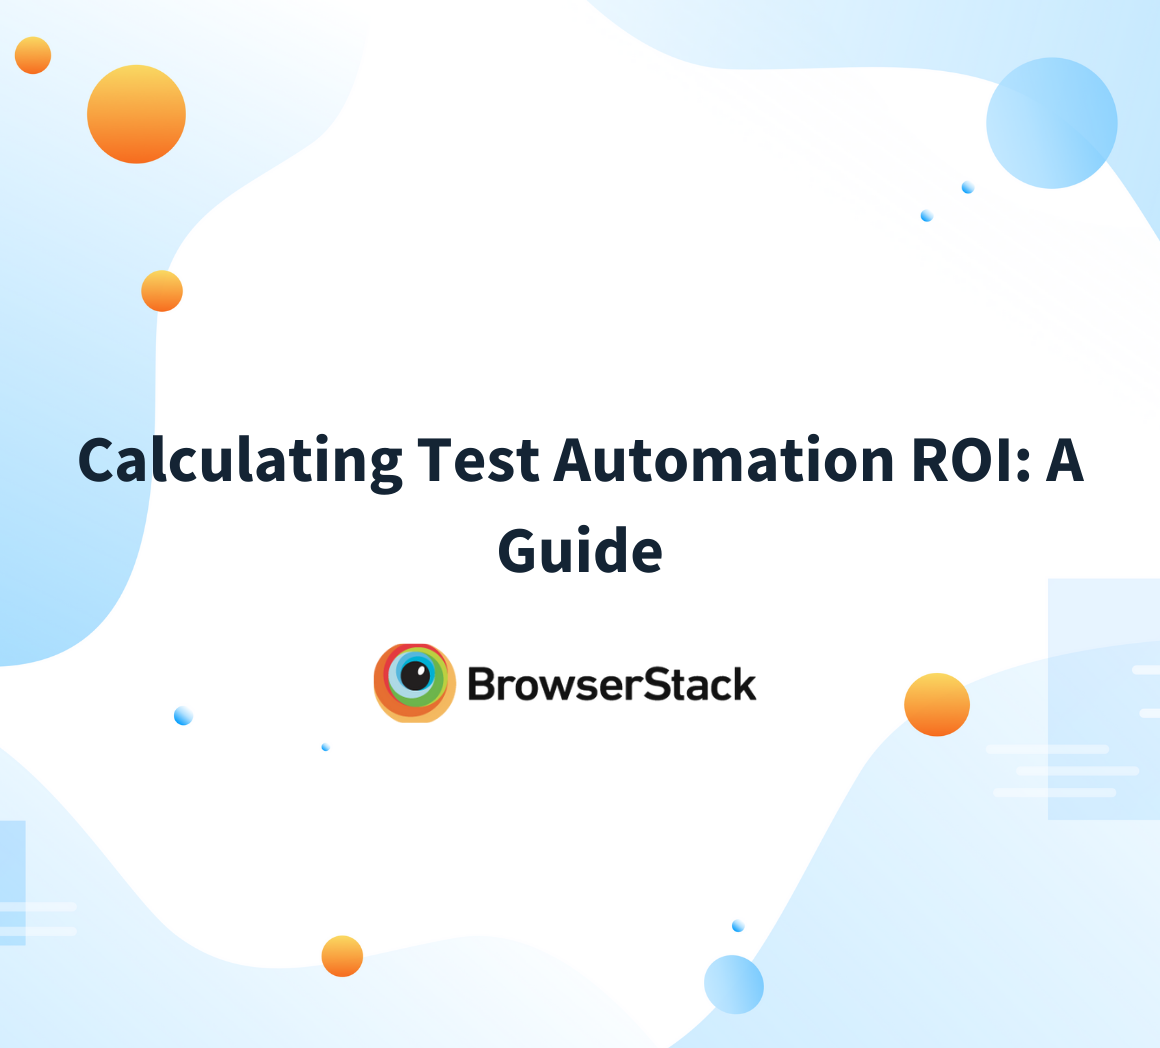 How to calculate test automation ROI